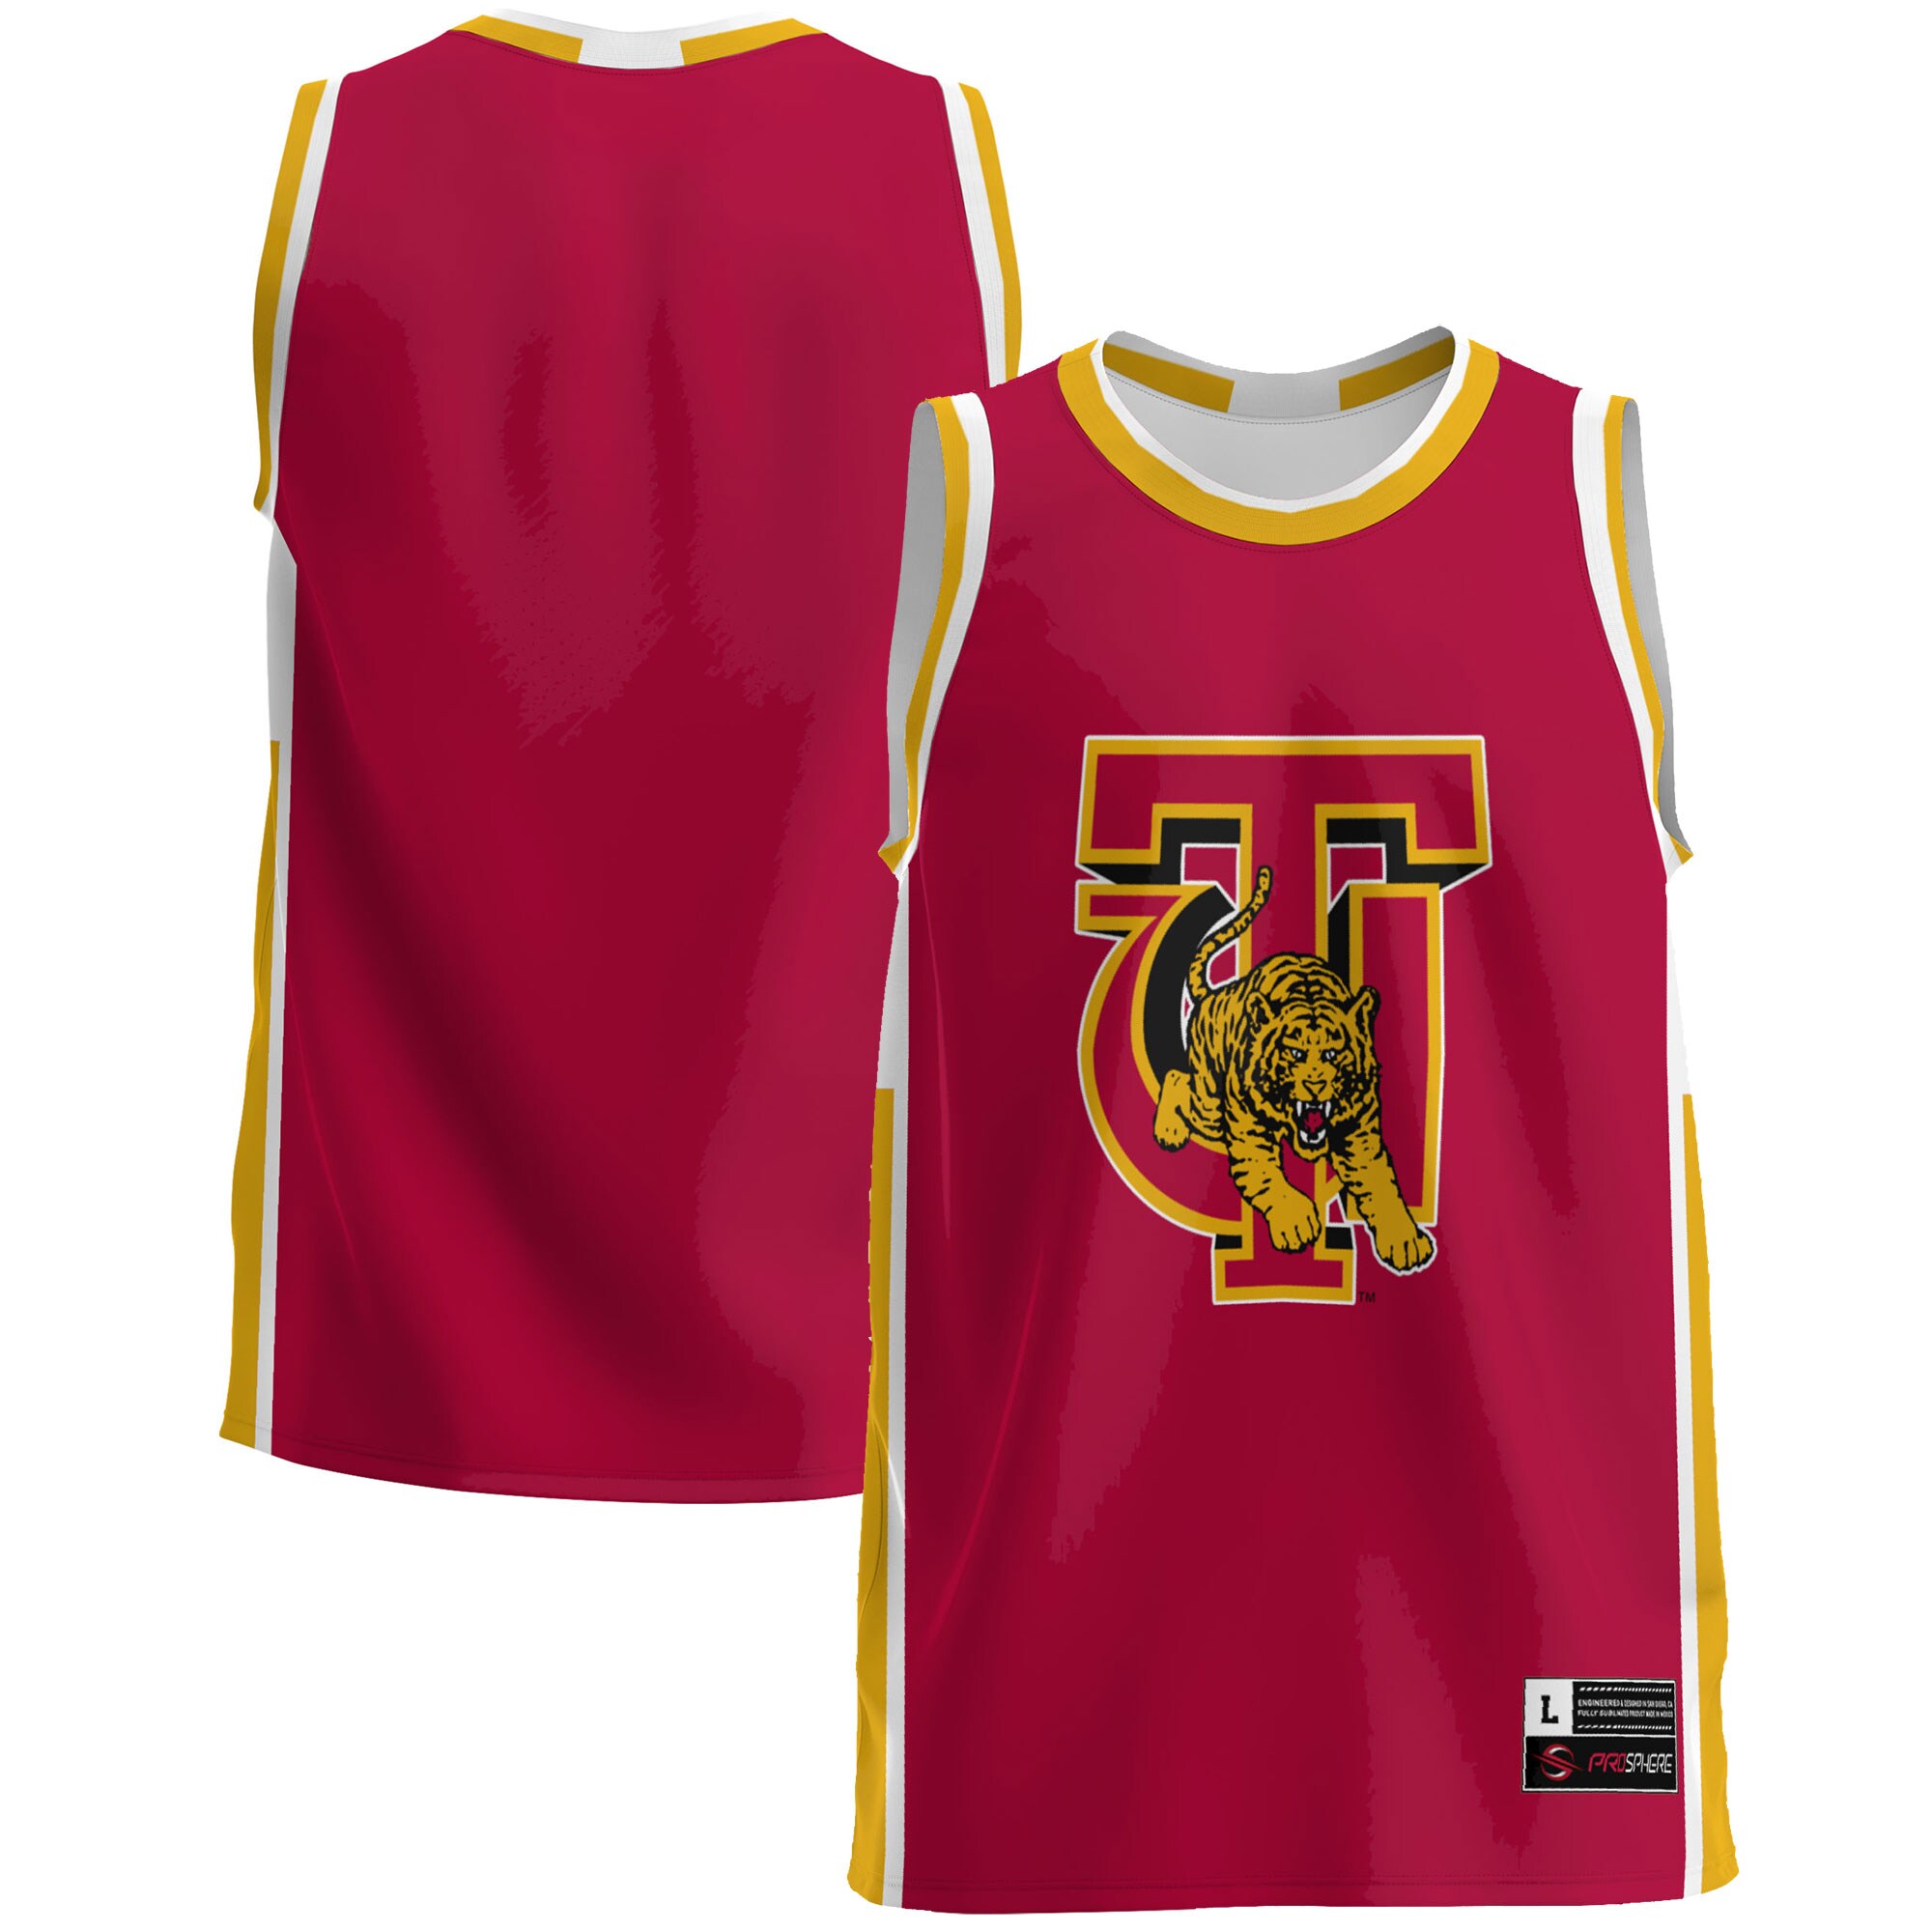 Tuskegee Golden Tigers Basketball Jersey - Crimson For Youth Women Men